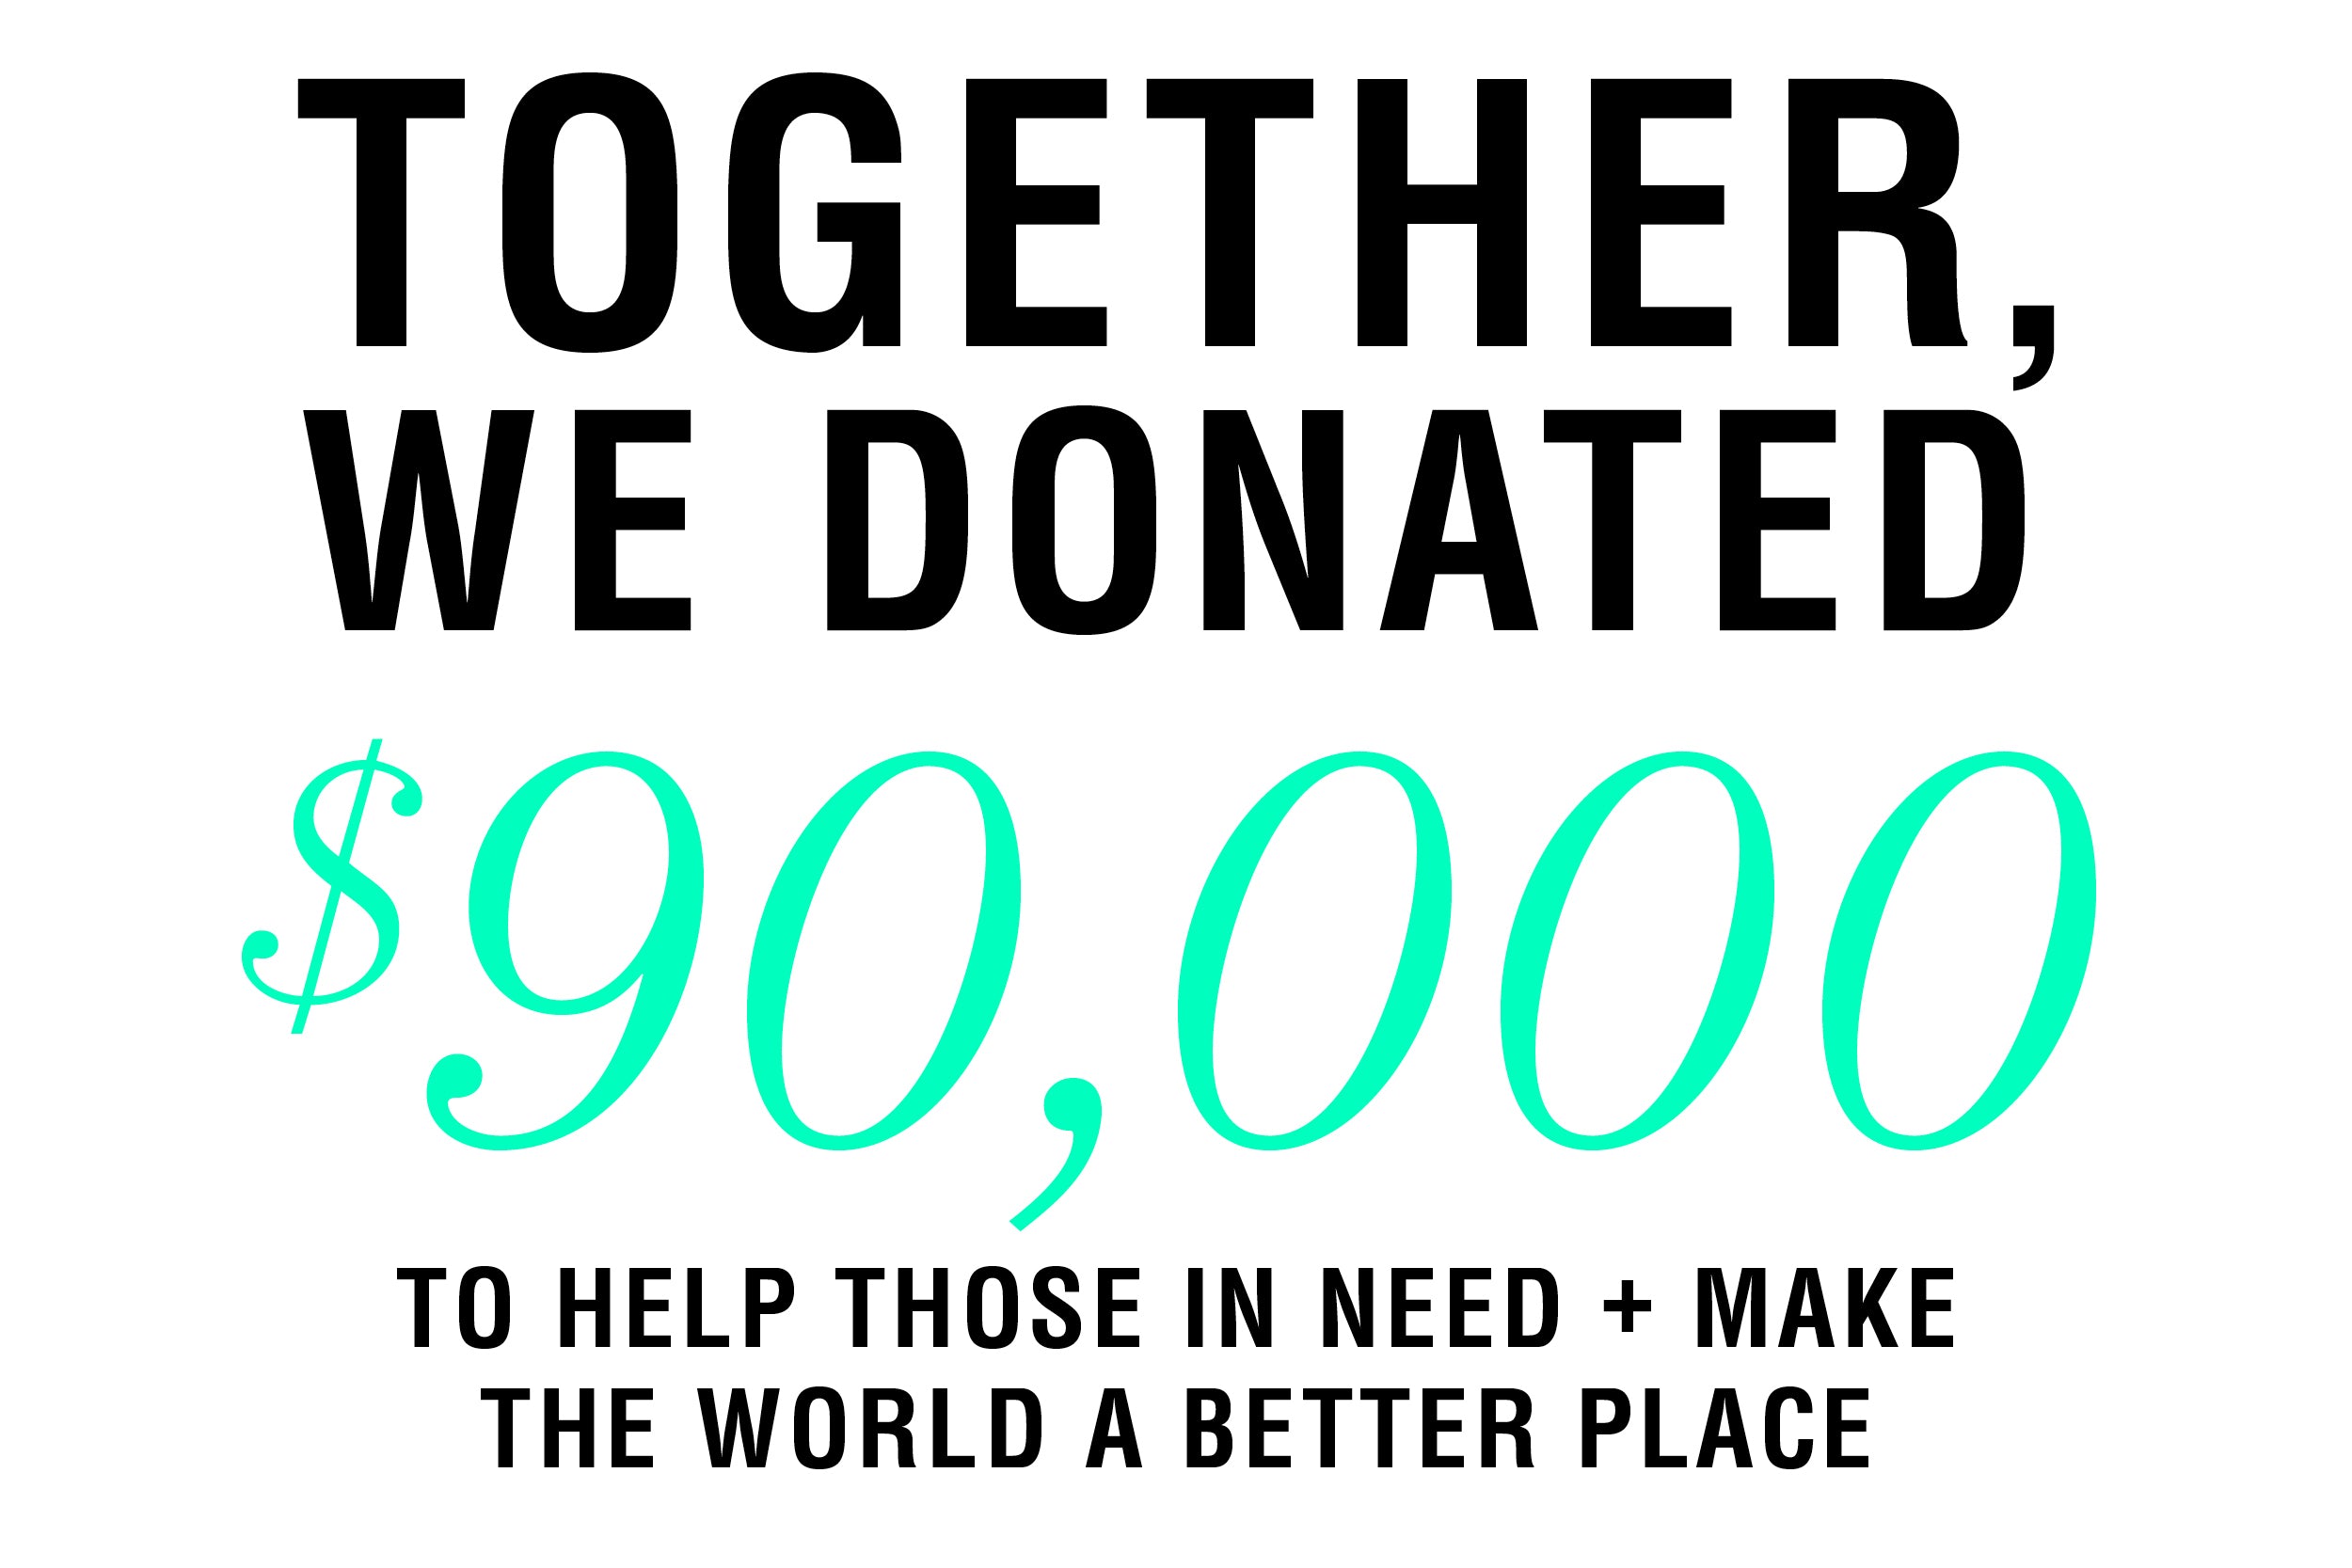 Together, we donated $90,000 to help those in need + make the world a better place.